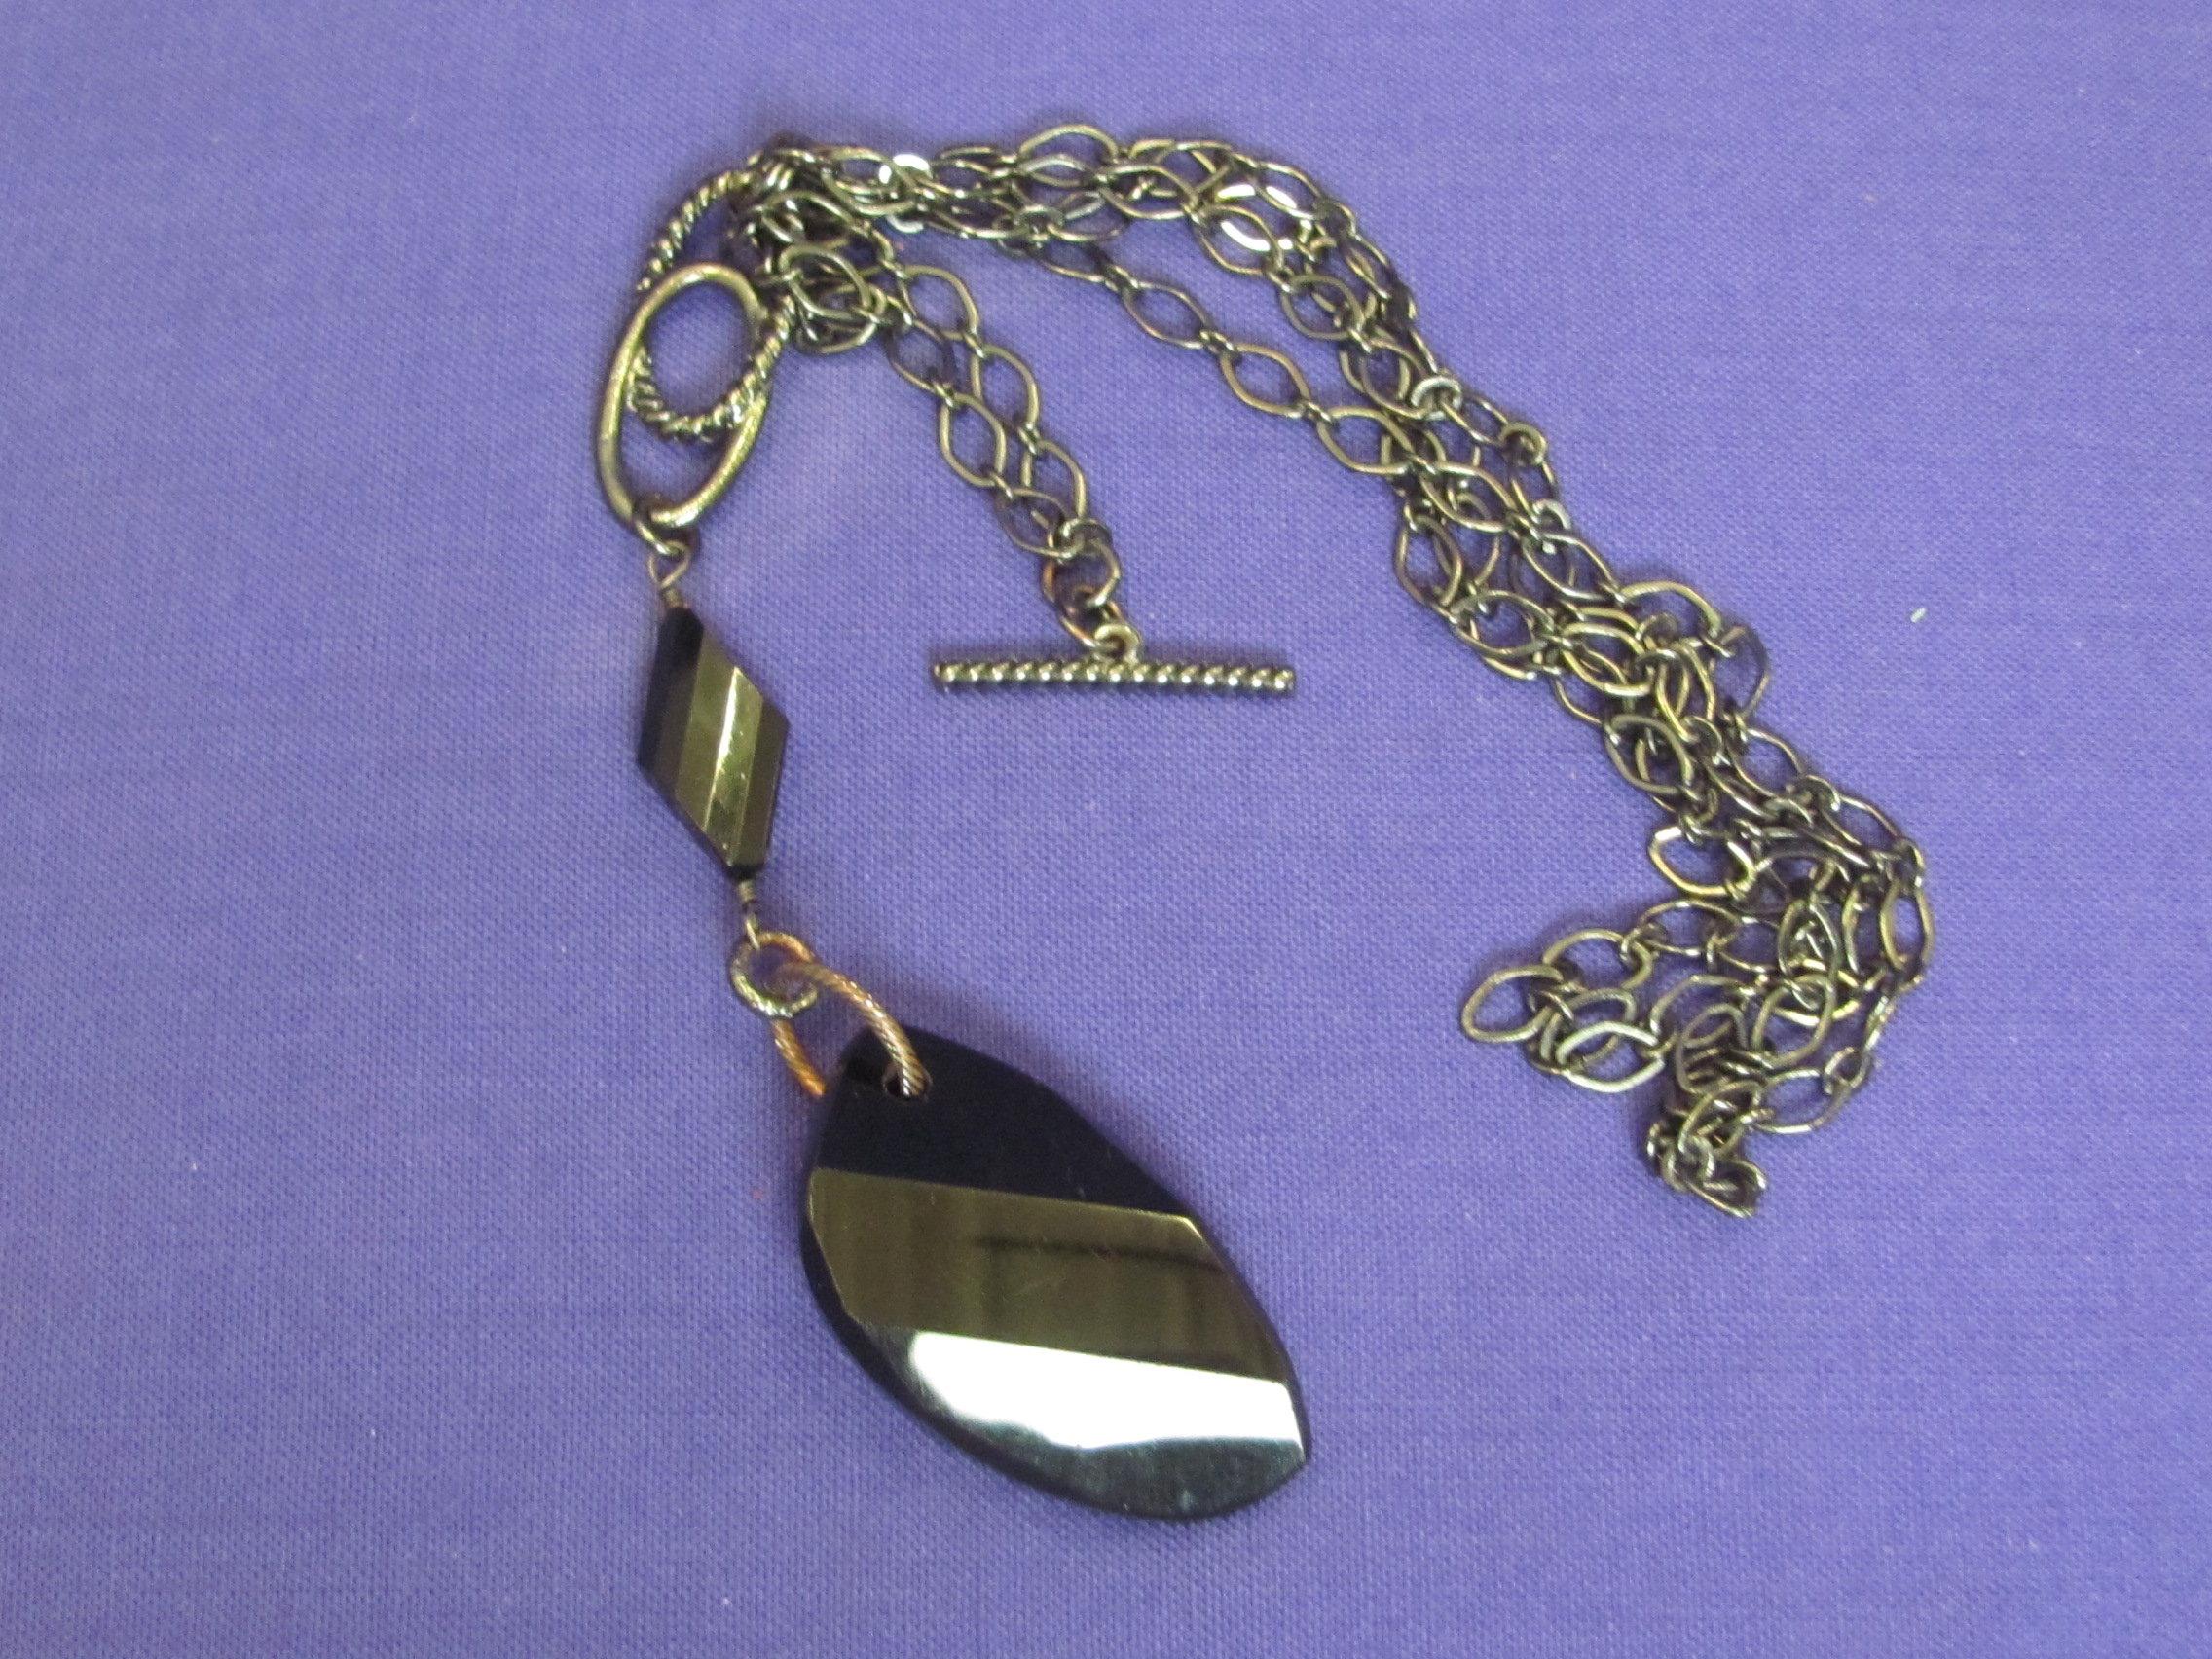 Necklaces & Bracelets in Browns, Blacks & other neutrals – good condition, as shown